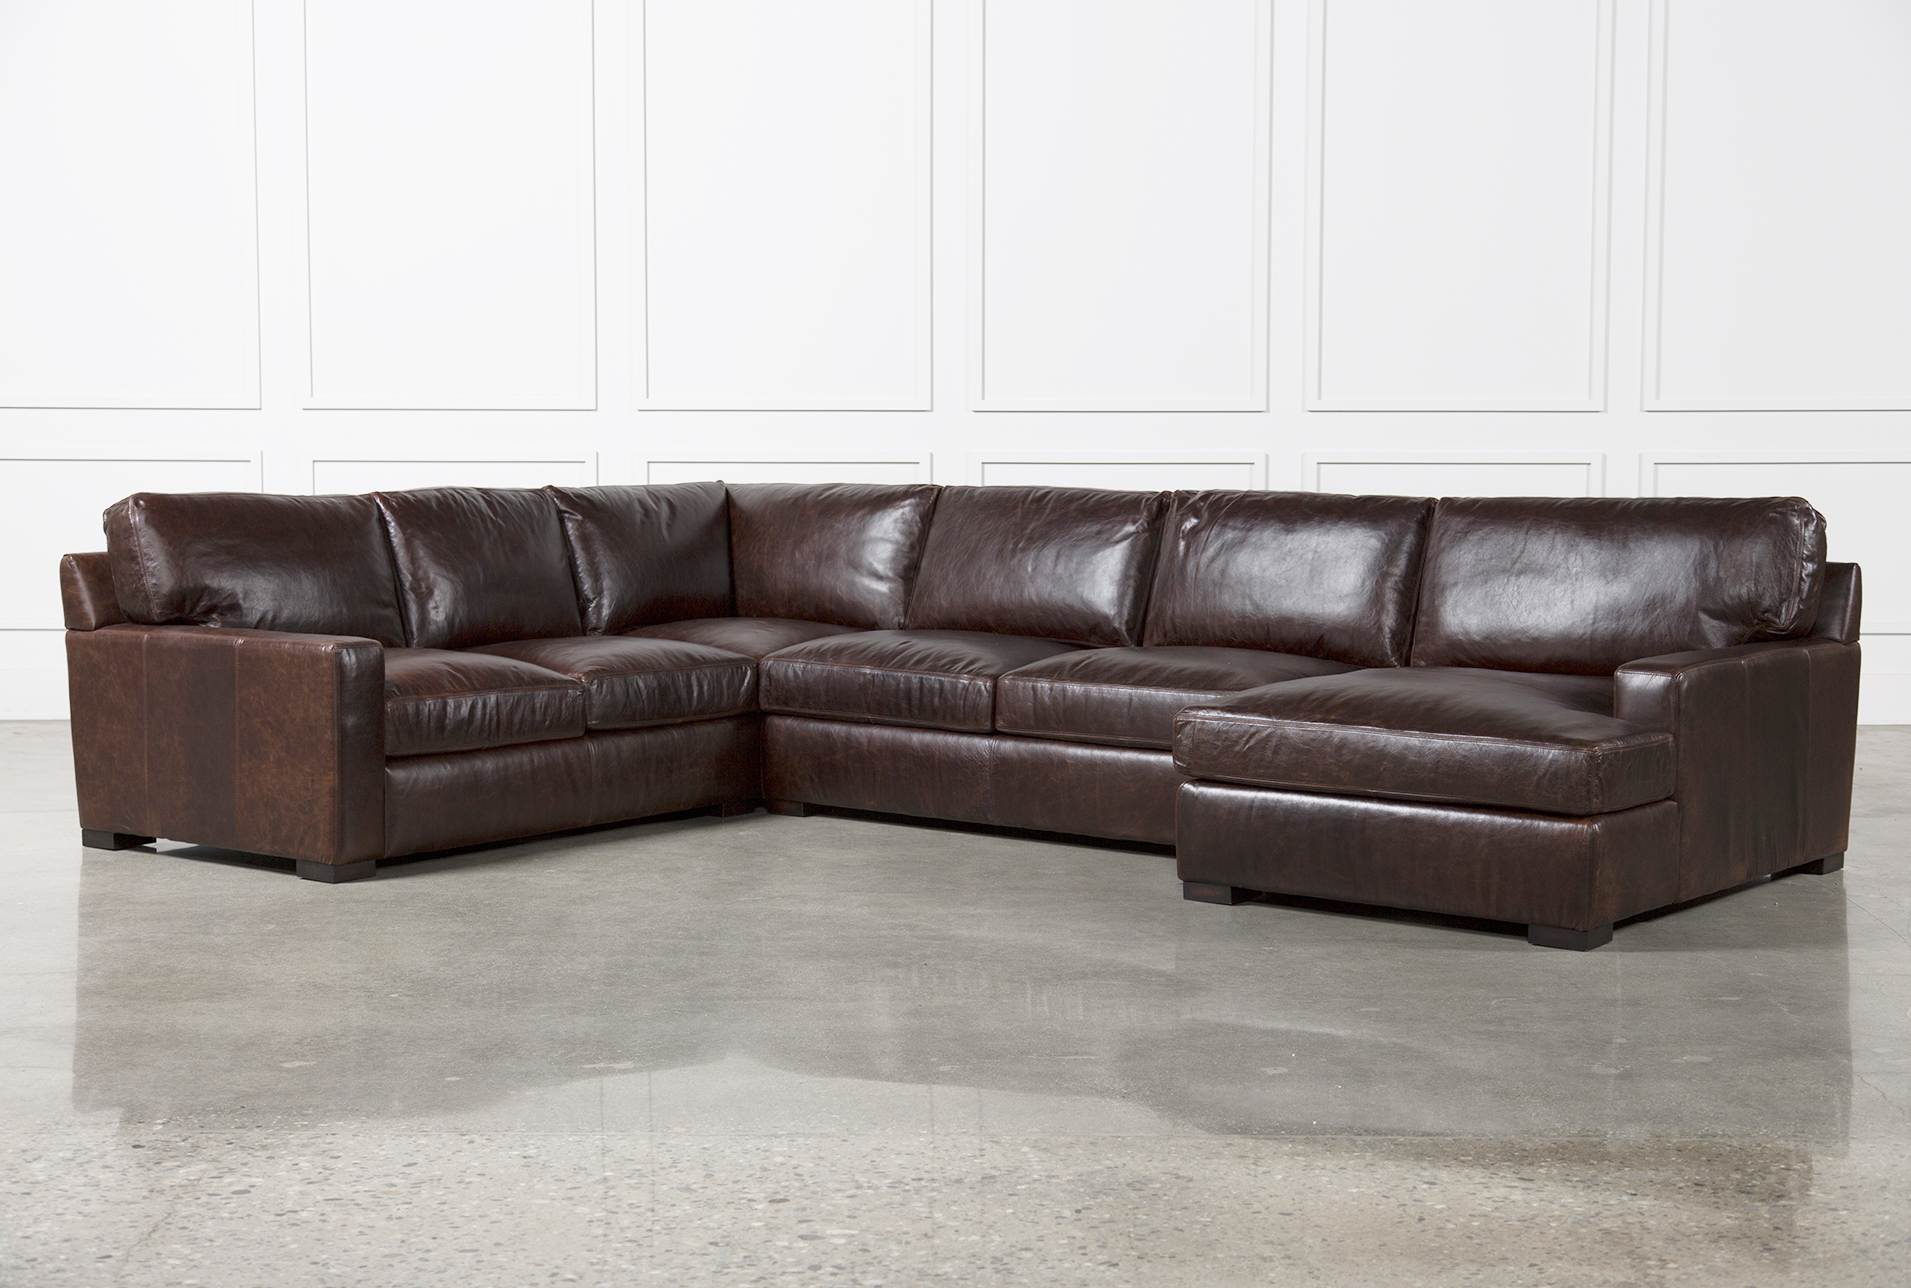 leather sectional sofa dimensions